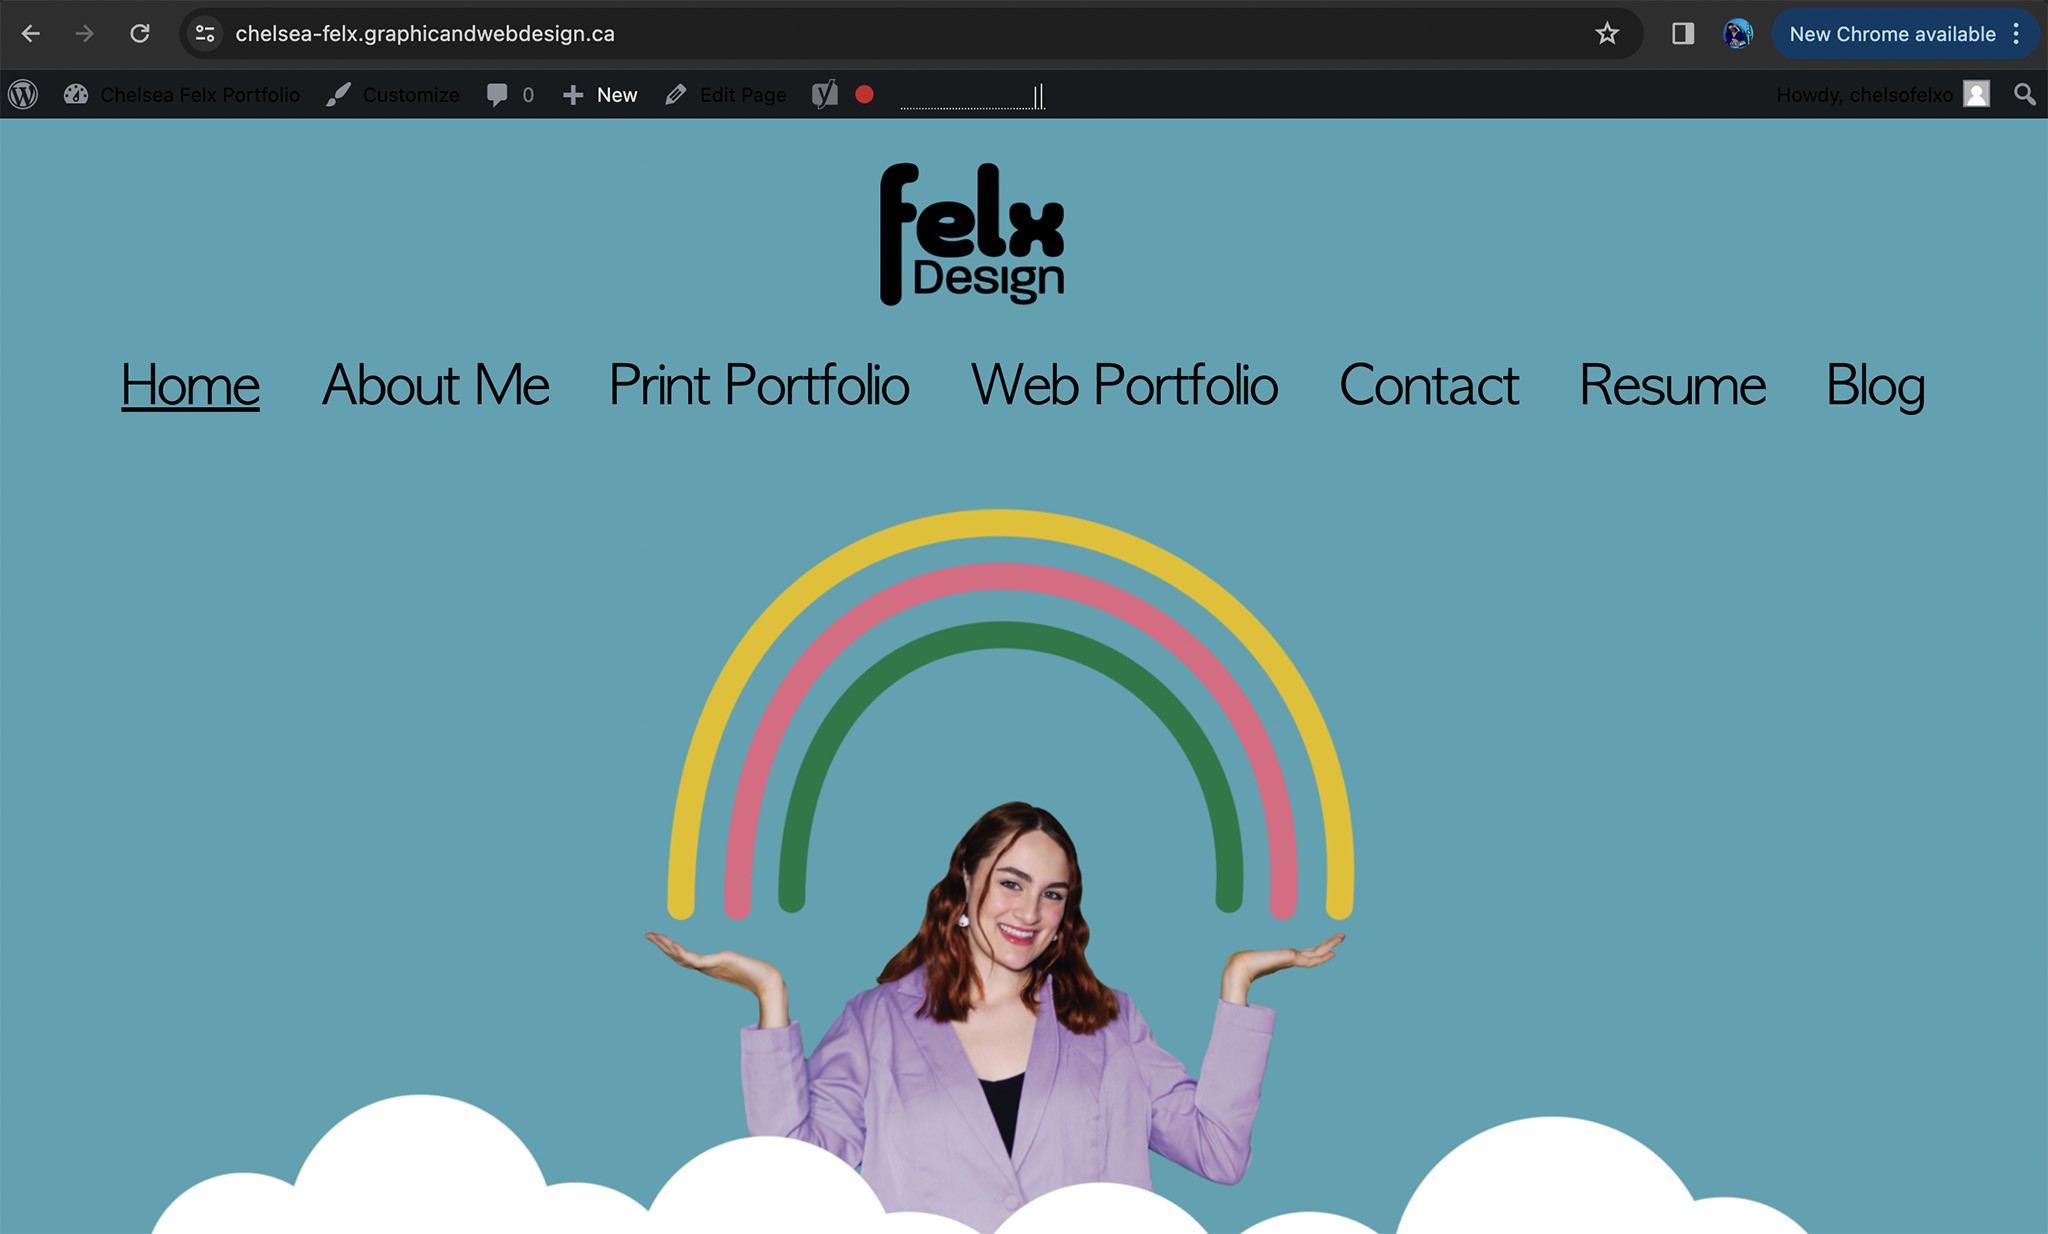 banner image for this portfolio website featuring girl with rainbow